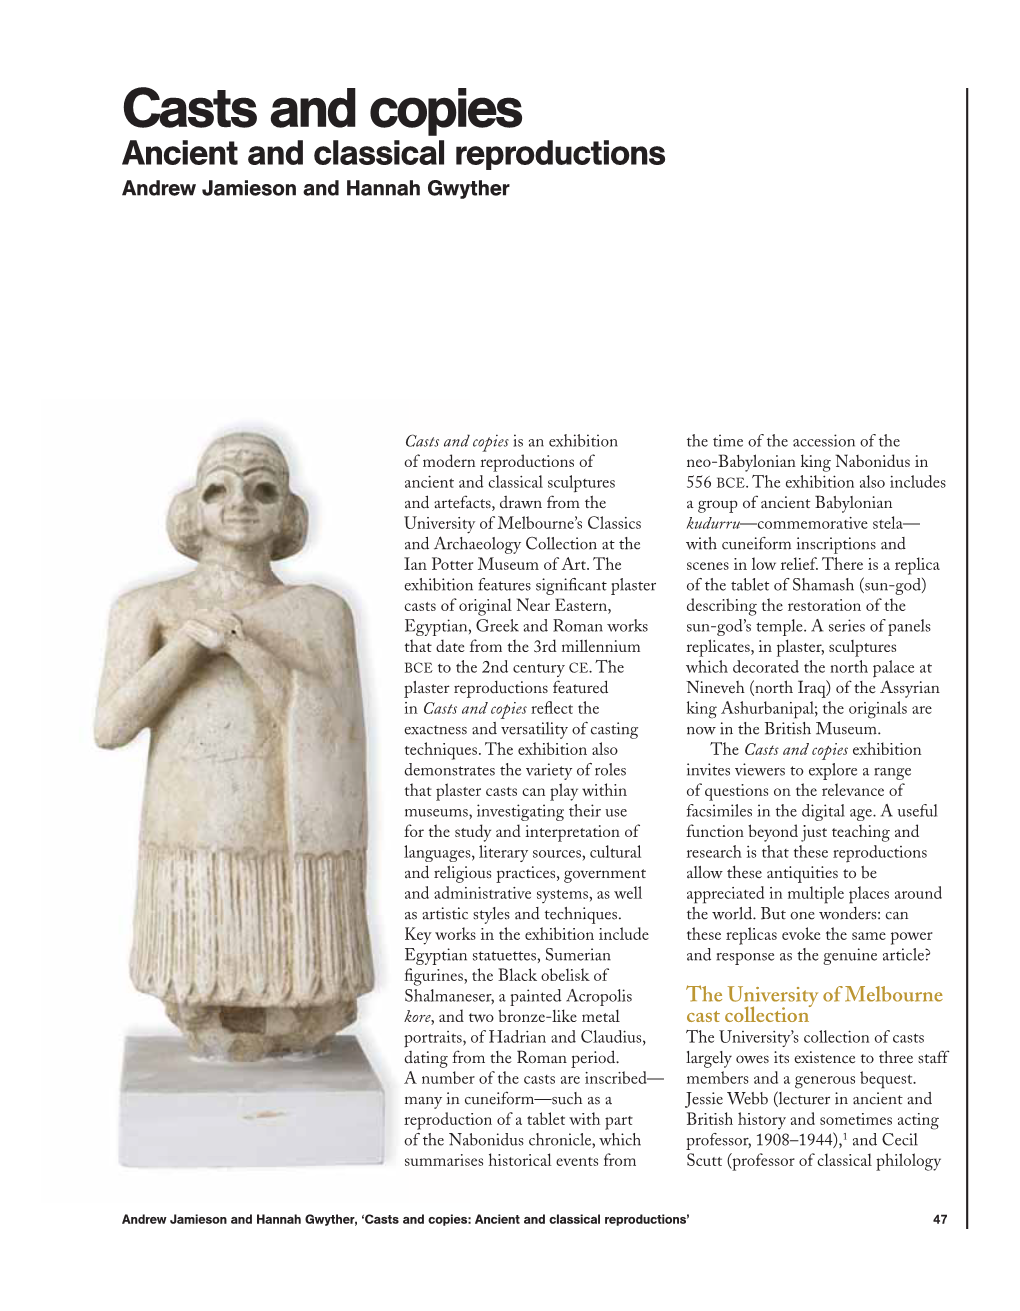 Casts and Copies: Ancient and Classical Reproductions